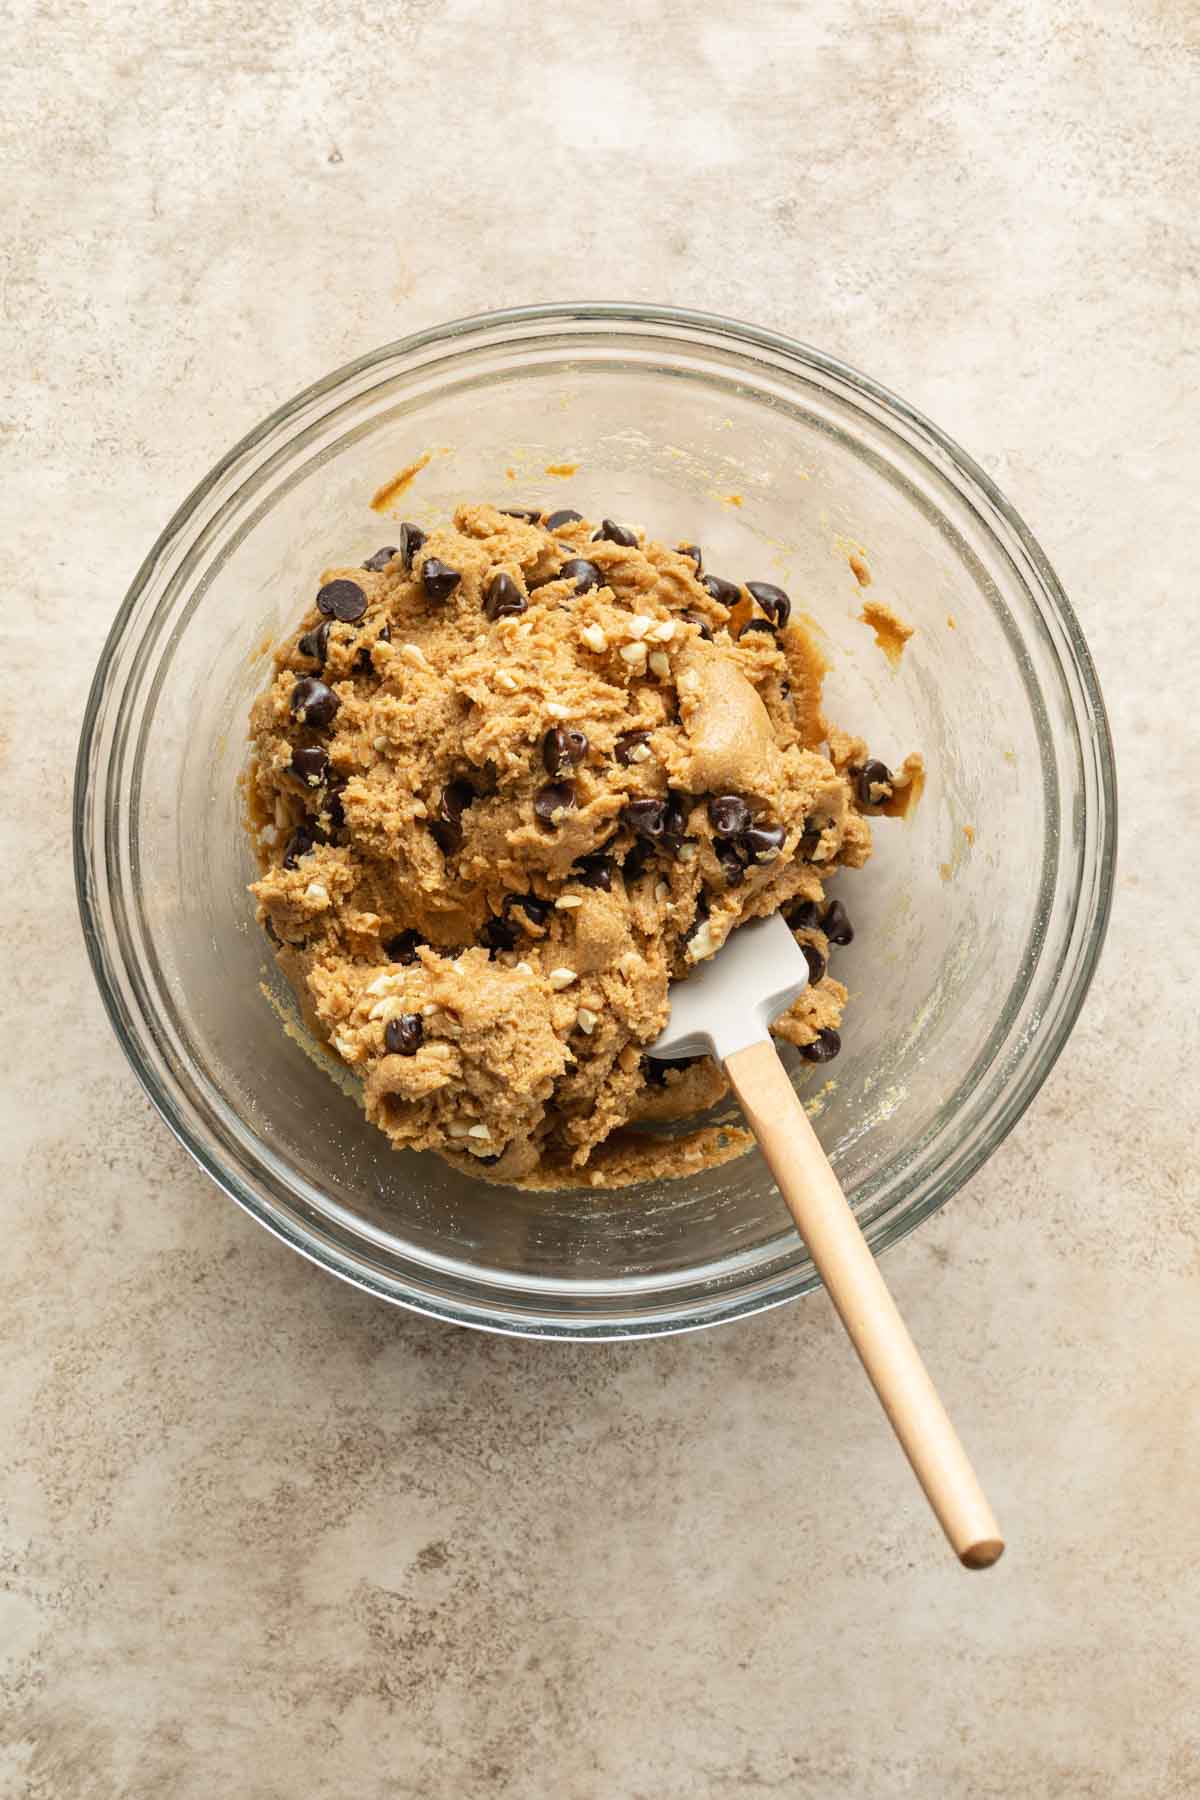 Cookie dough mixed with chocolate chips and peanuts in a glass bowl.